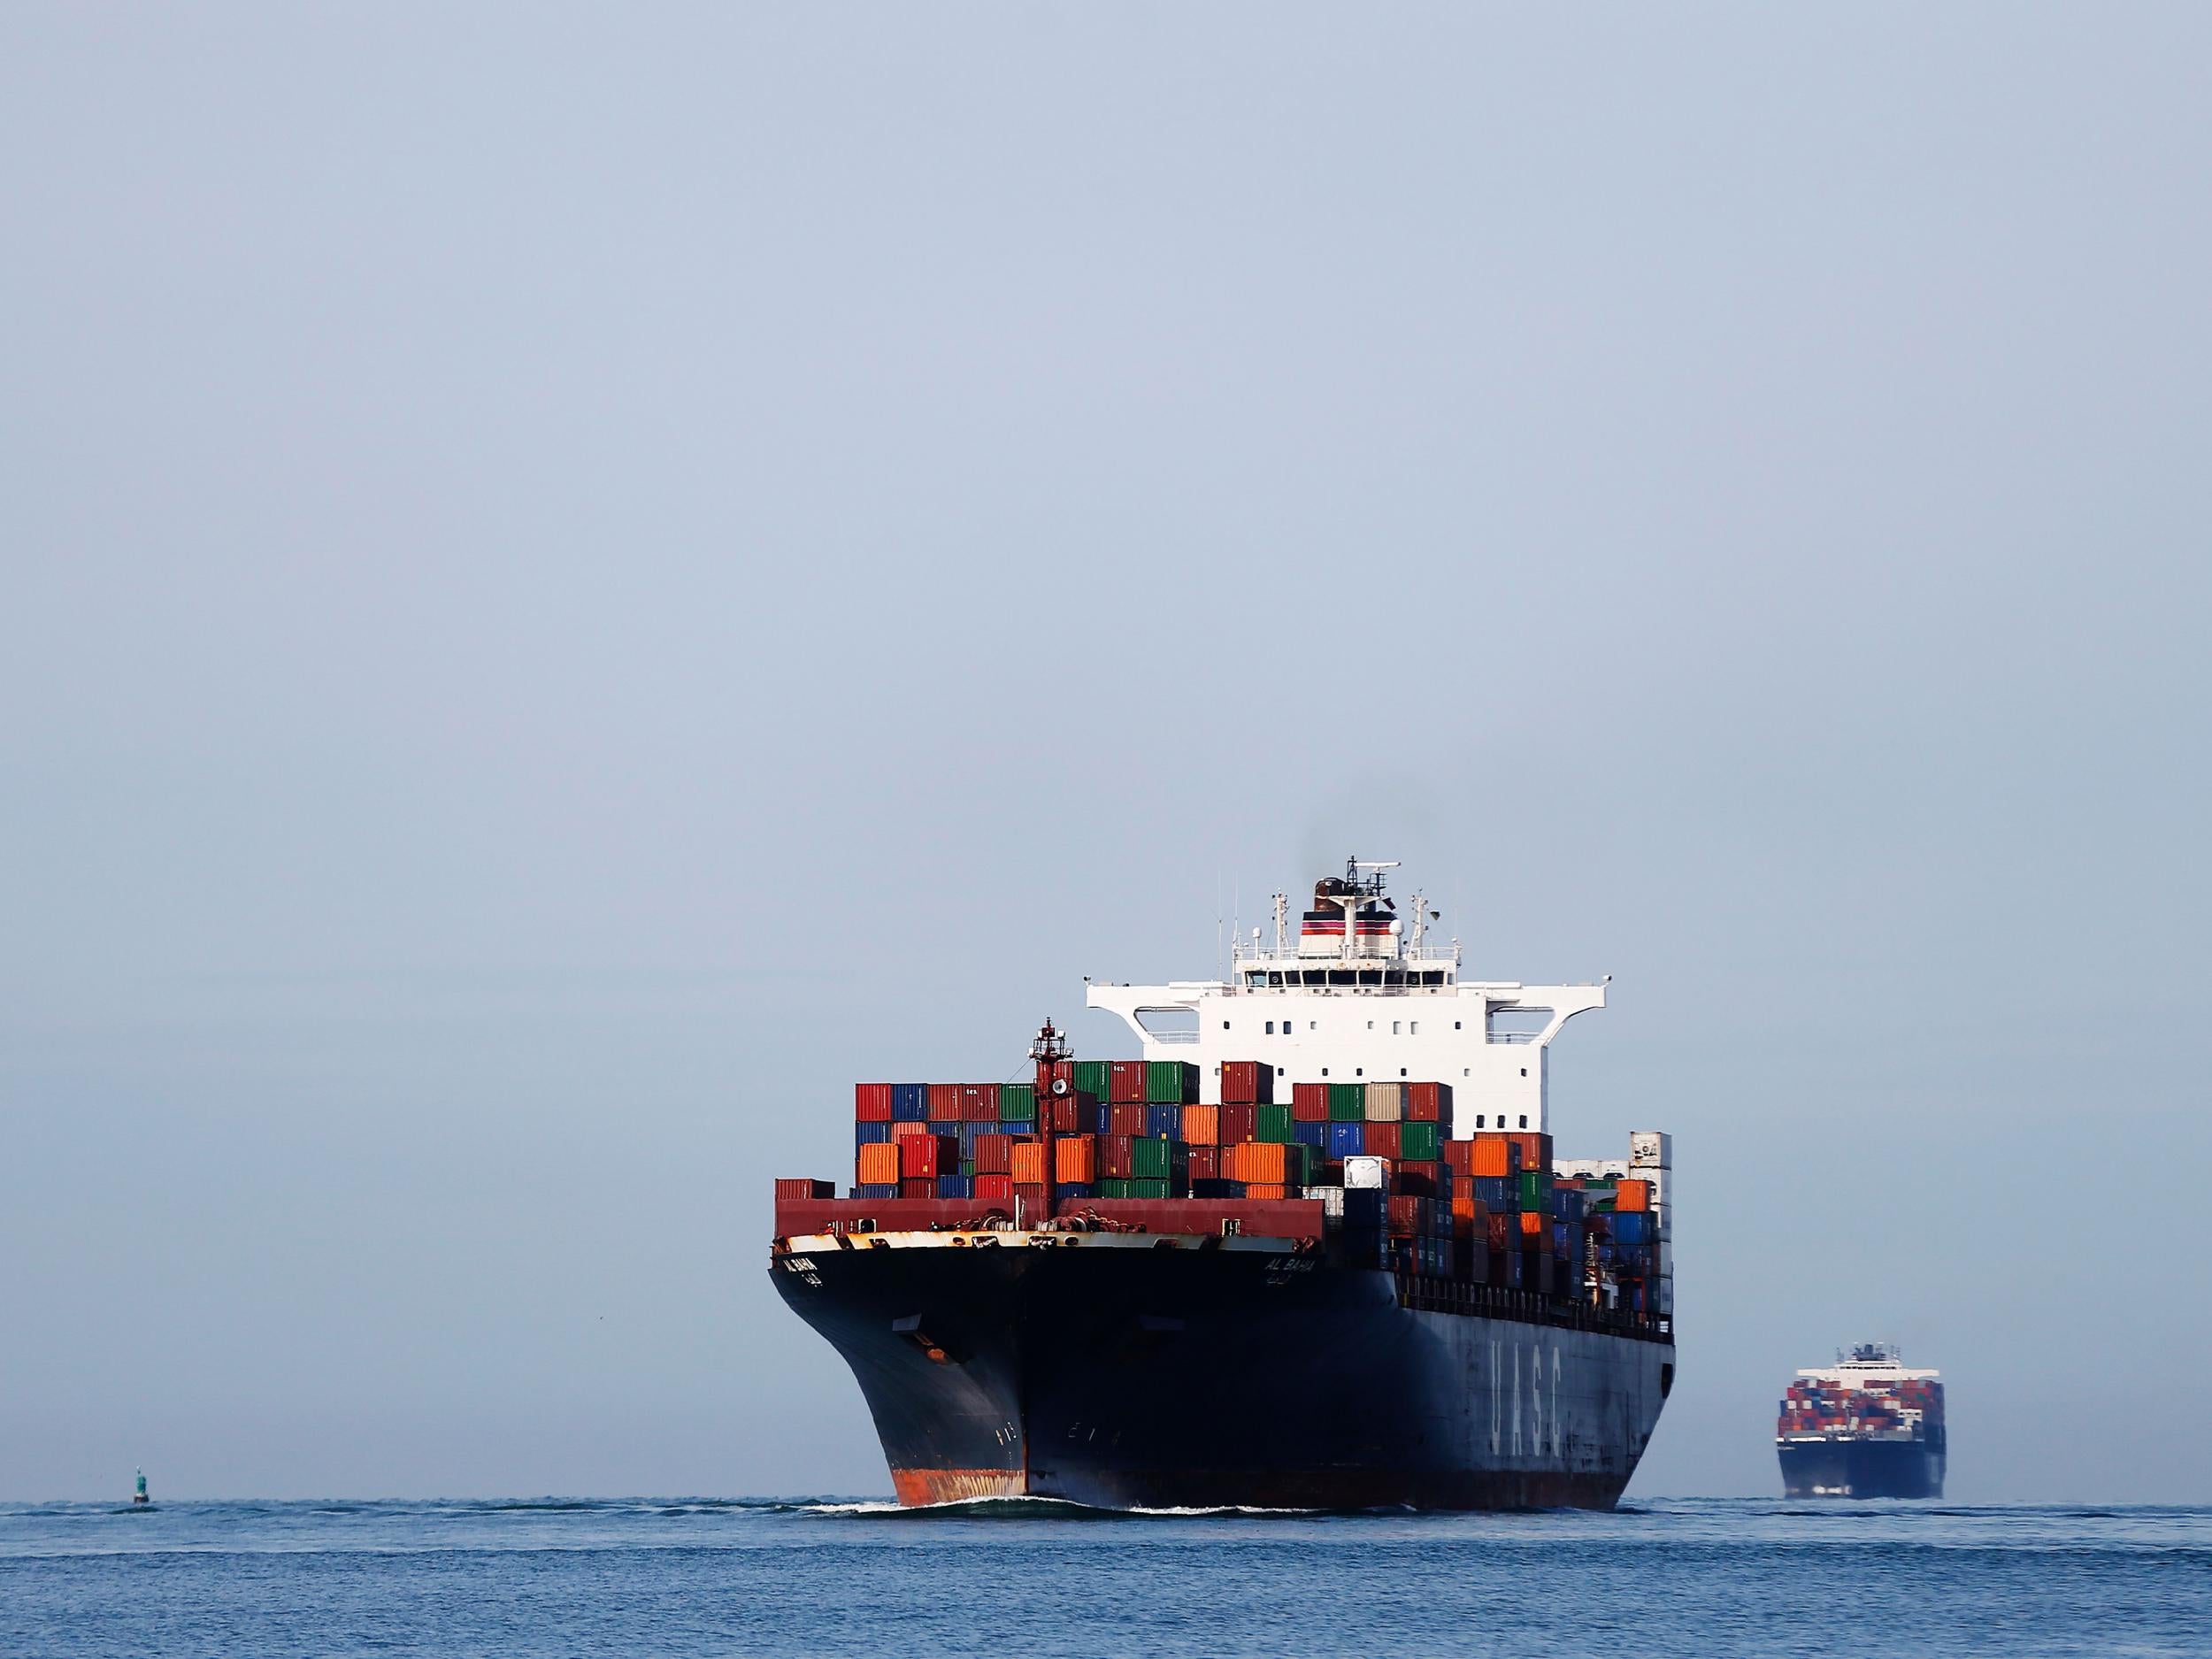 Shipping is a major contributor to harmful air pollution, but replacing conventional fuels with low-sulphur alternatives could improve health outcomes